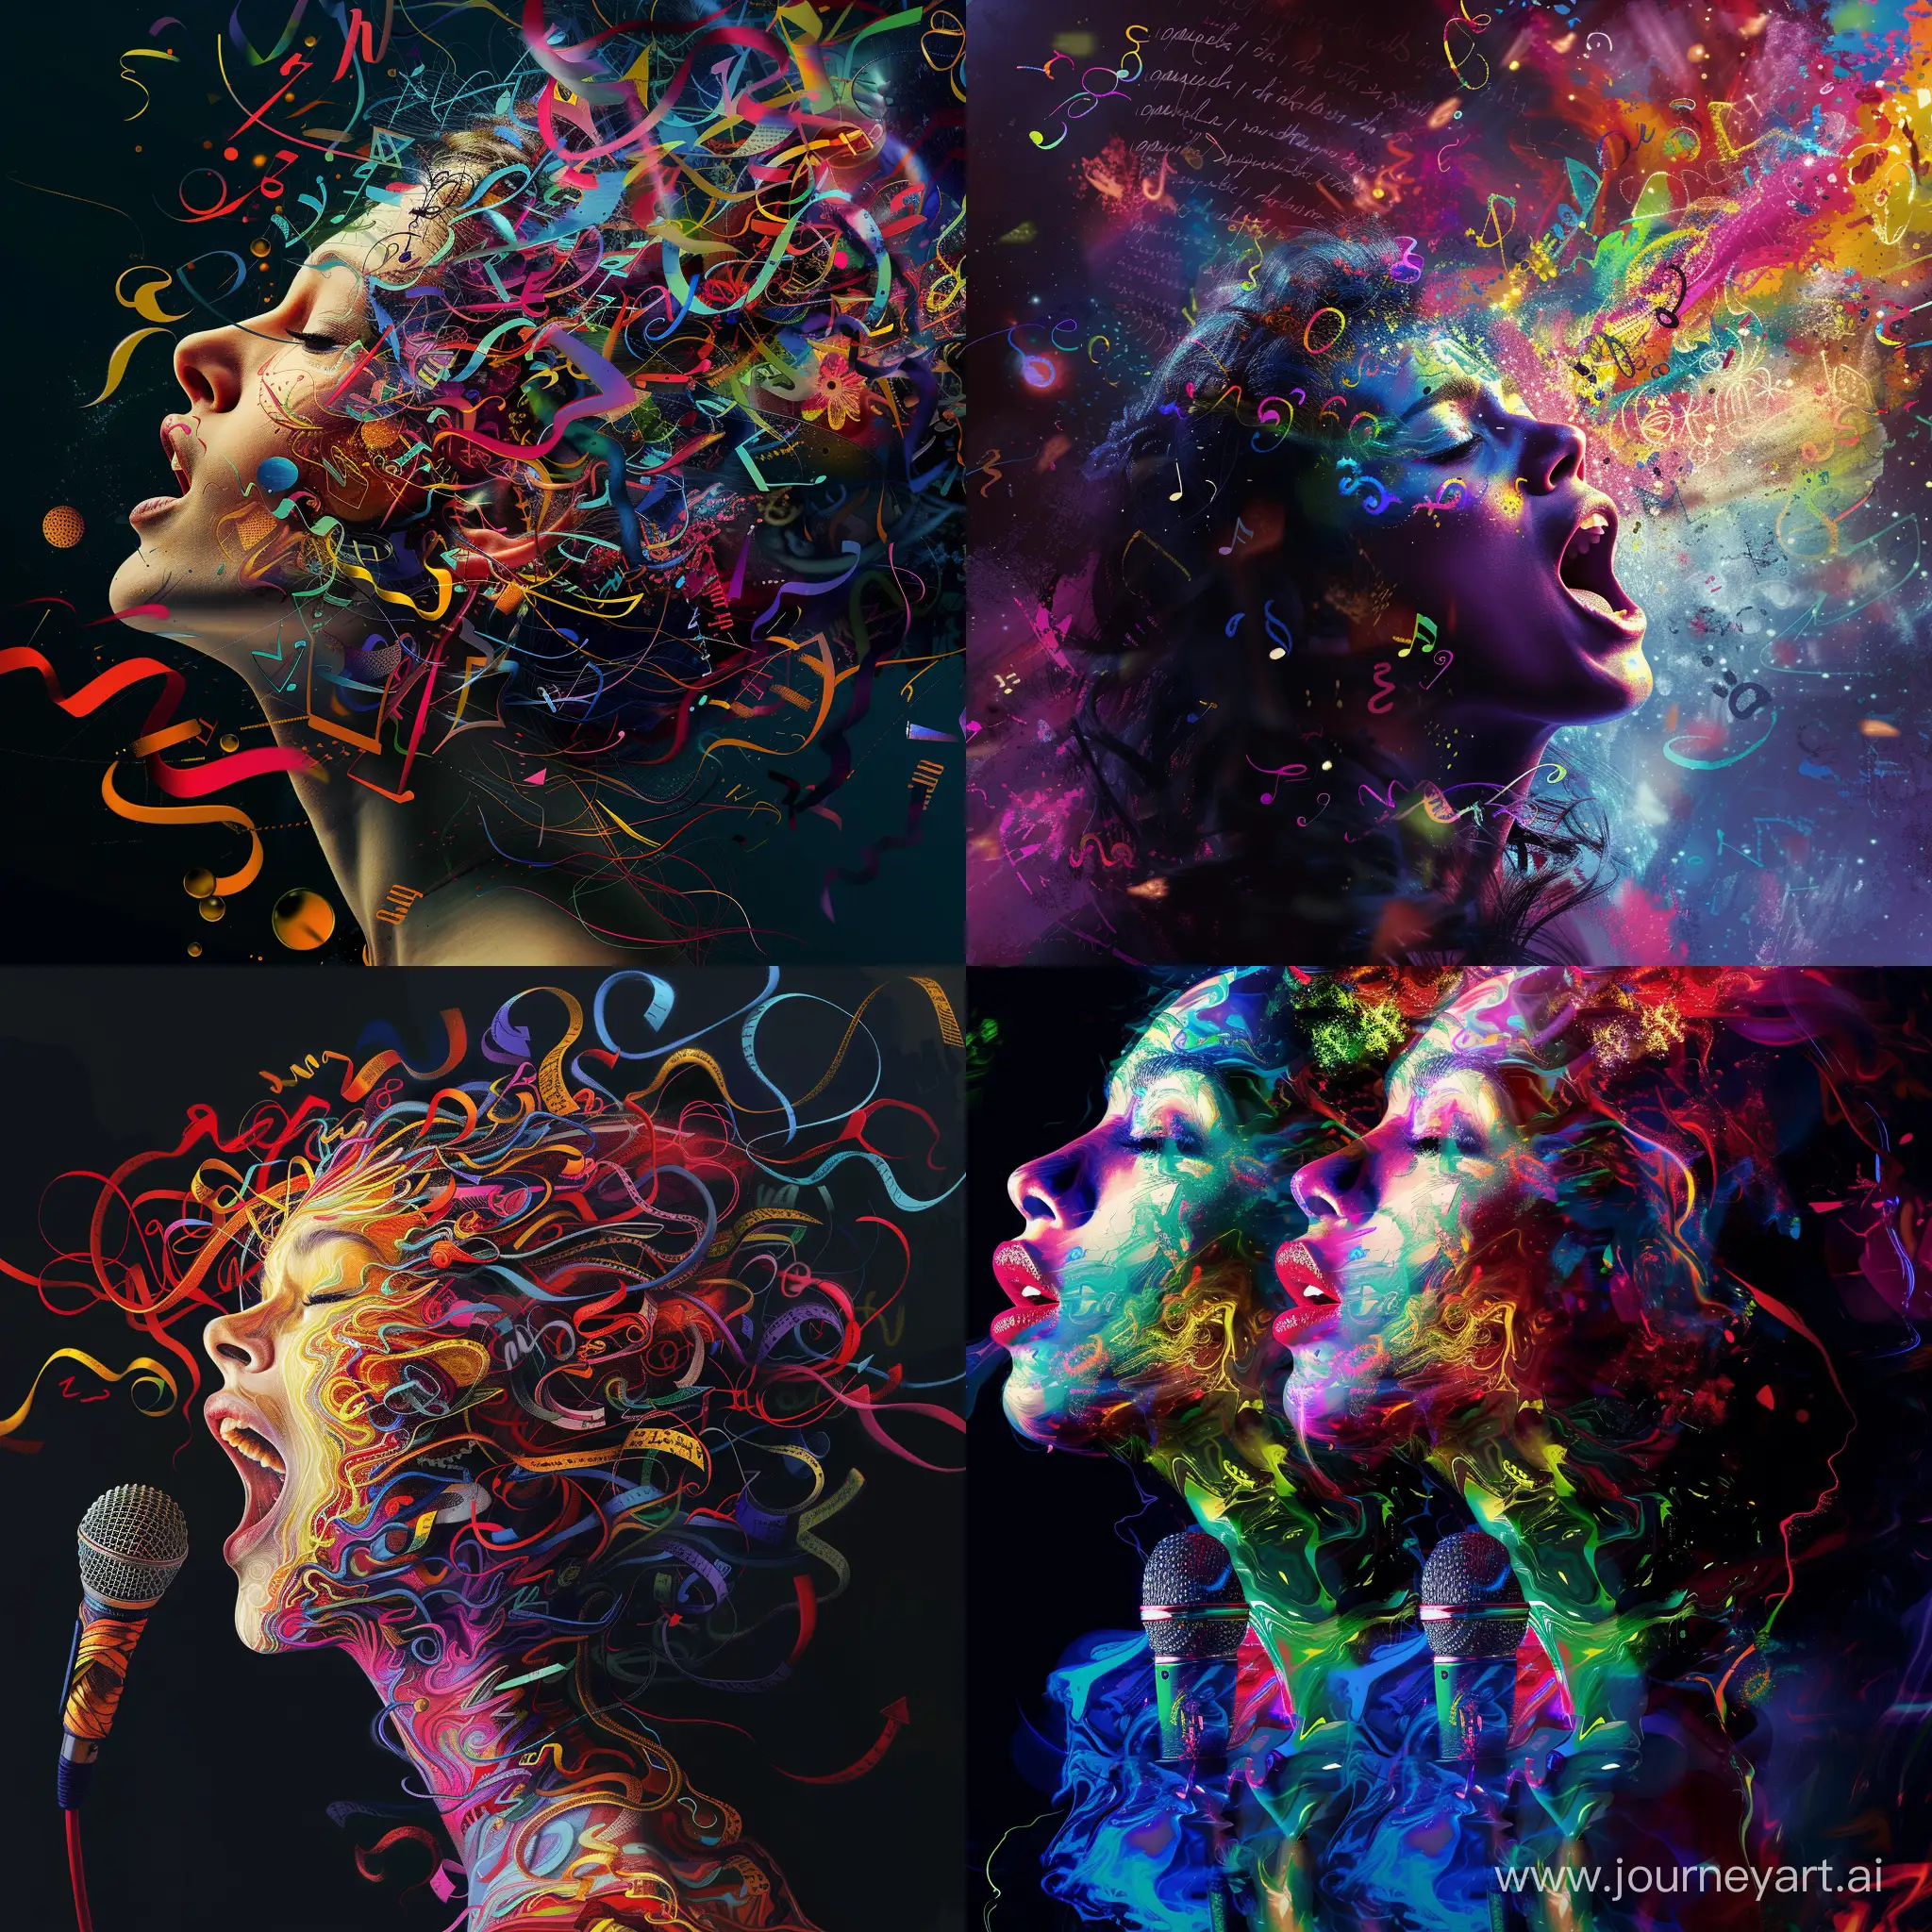 Vibrant-Female-Creativity-Expressing-Art-through-Words-Song-and-Sound